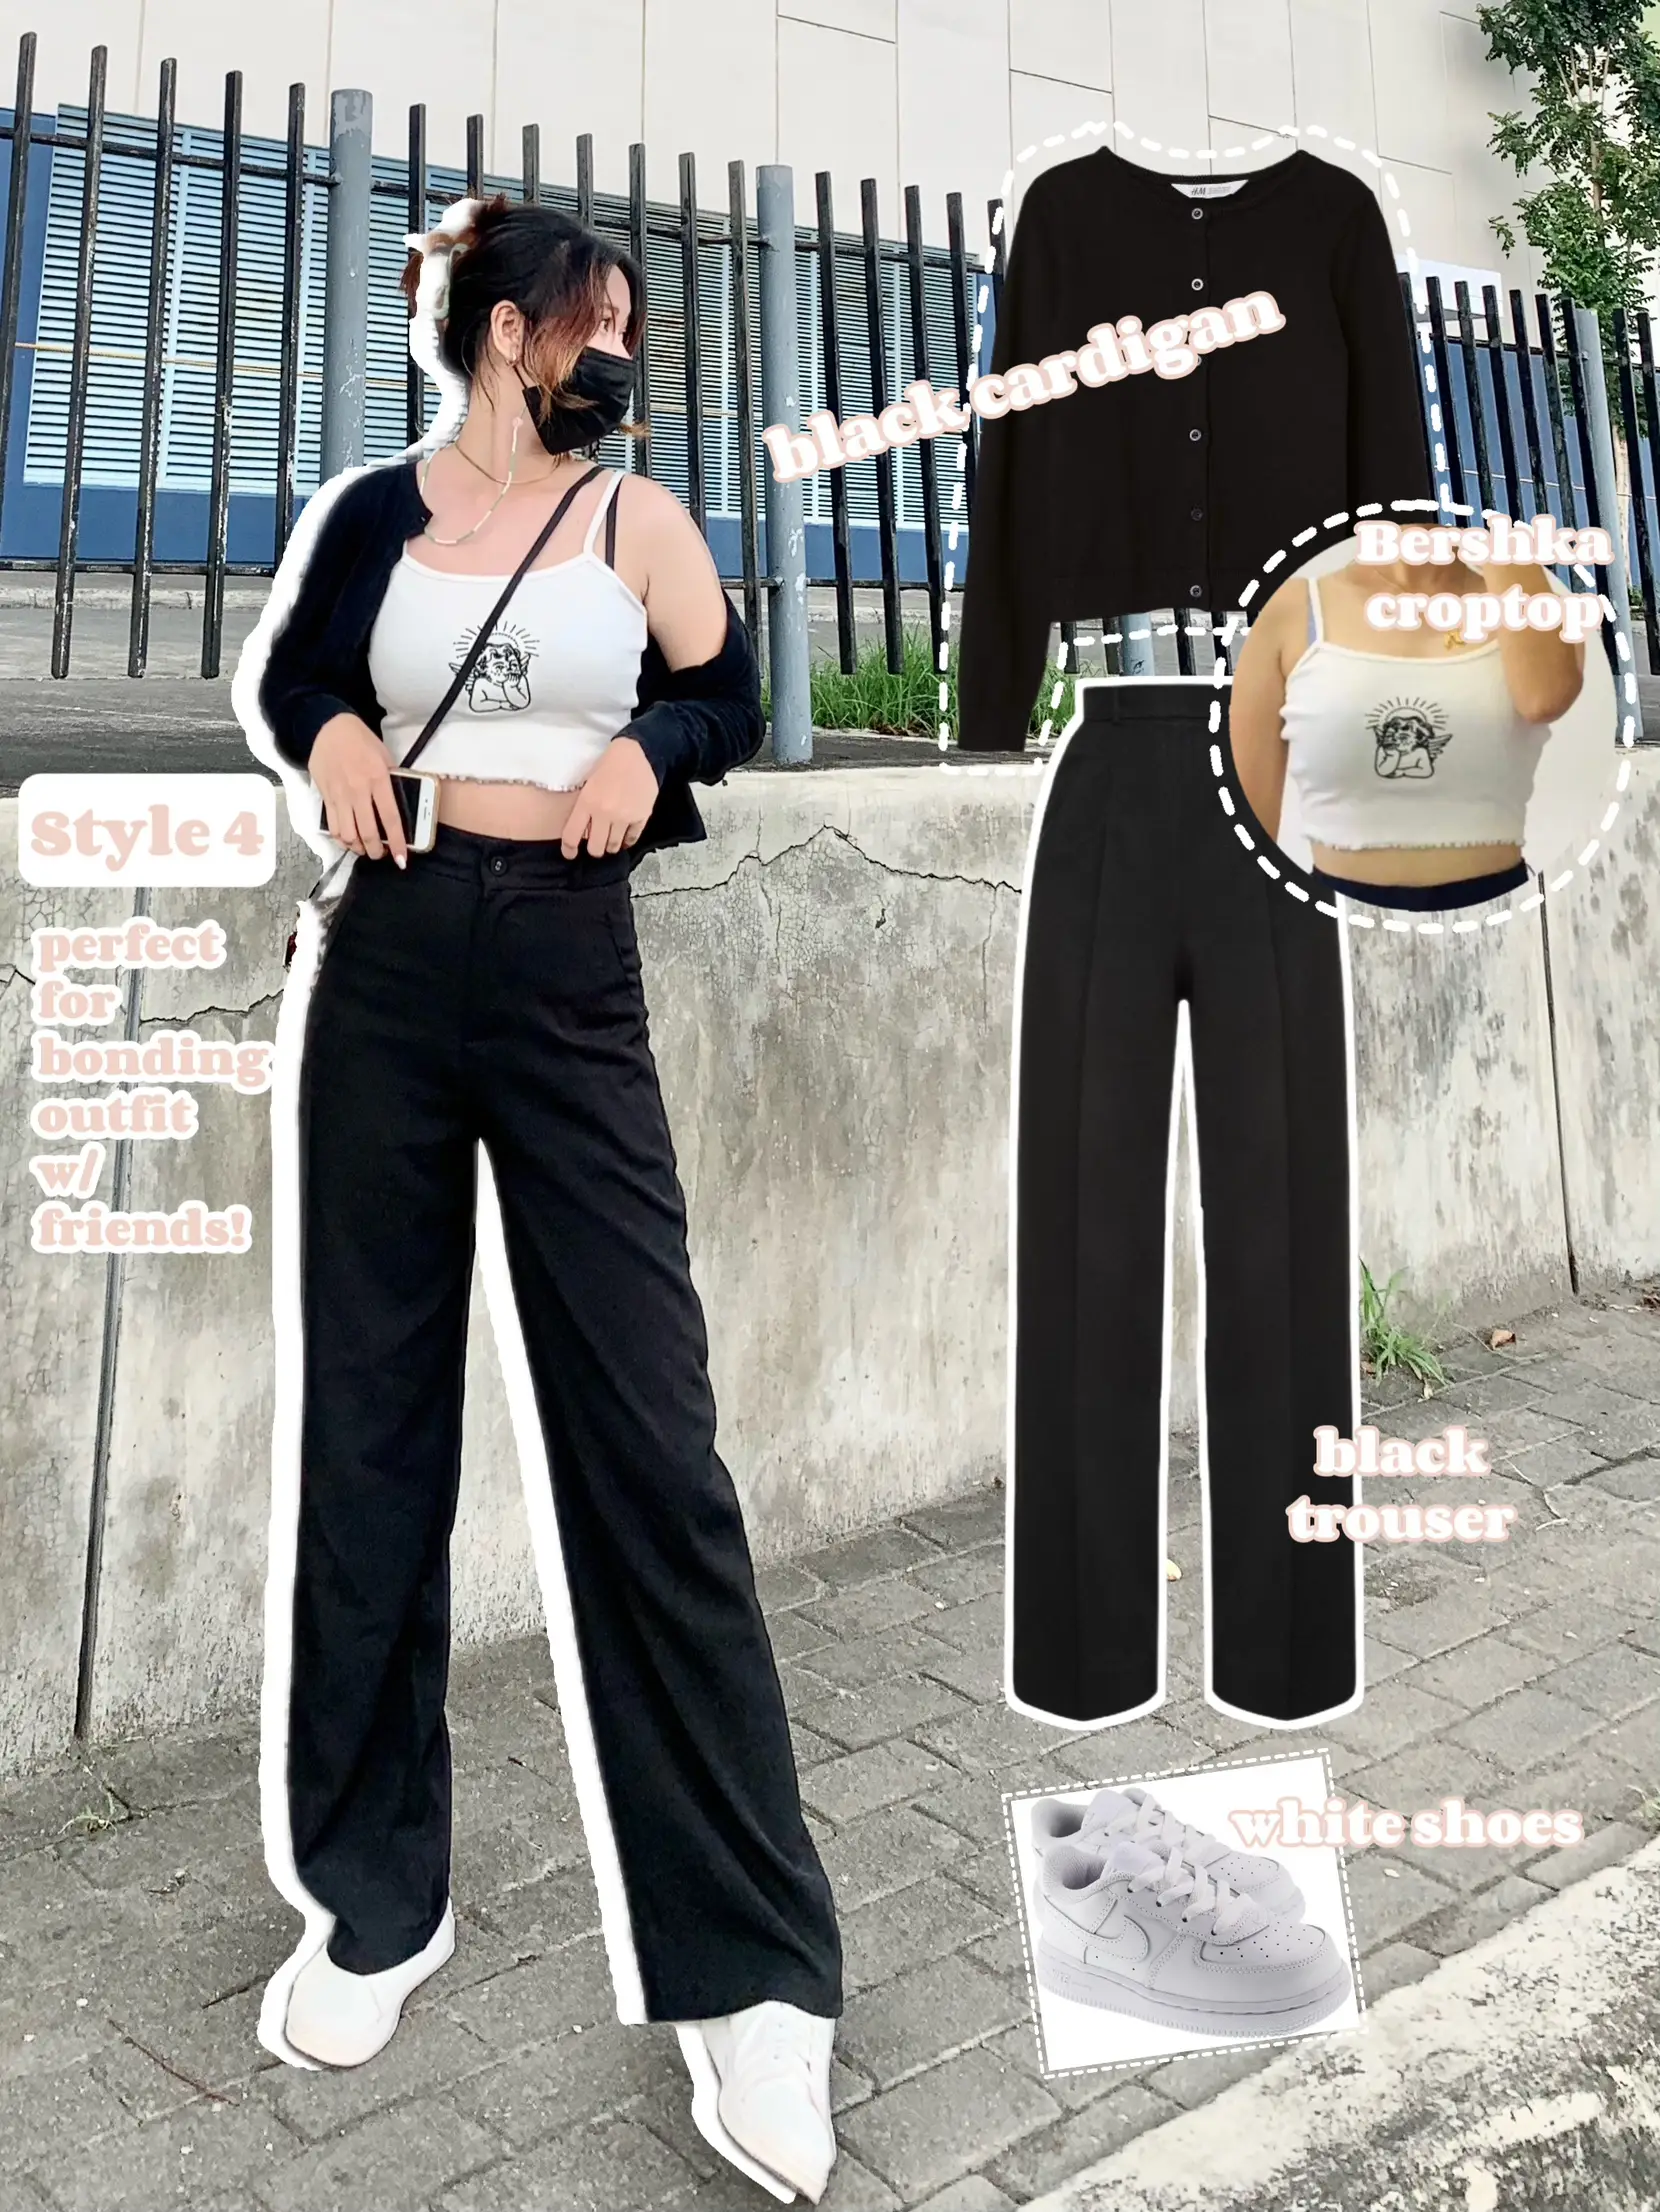 Black street workwear women's pants autumn and winter large size fat girl  mm pear-shaped slim pants loose wide-leg casual pants